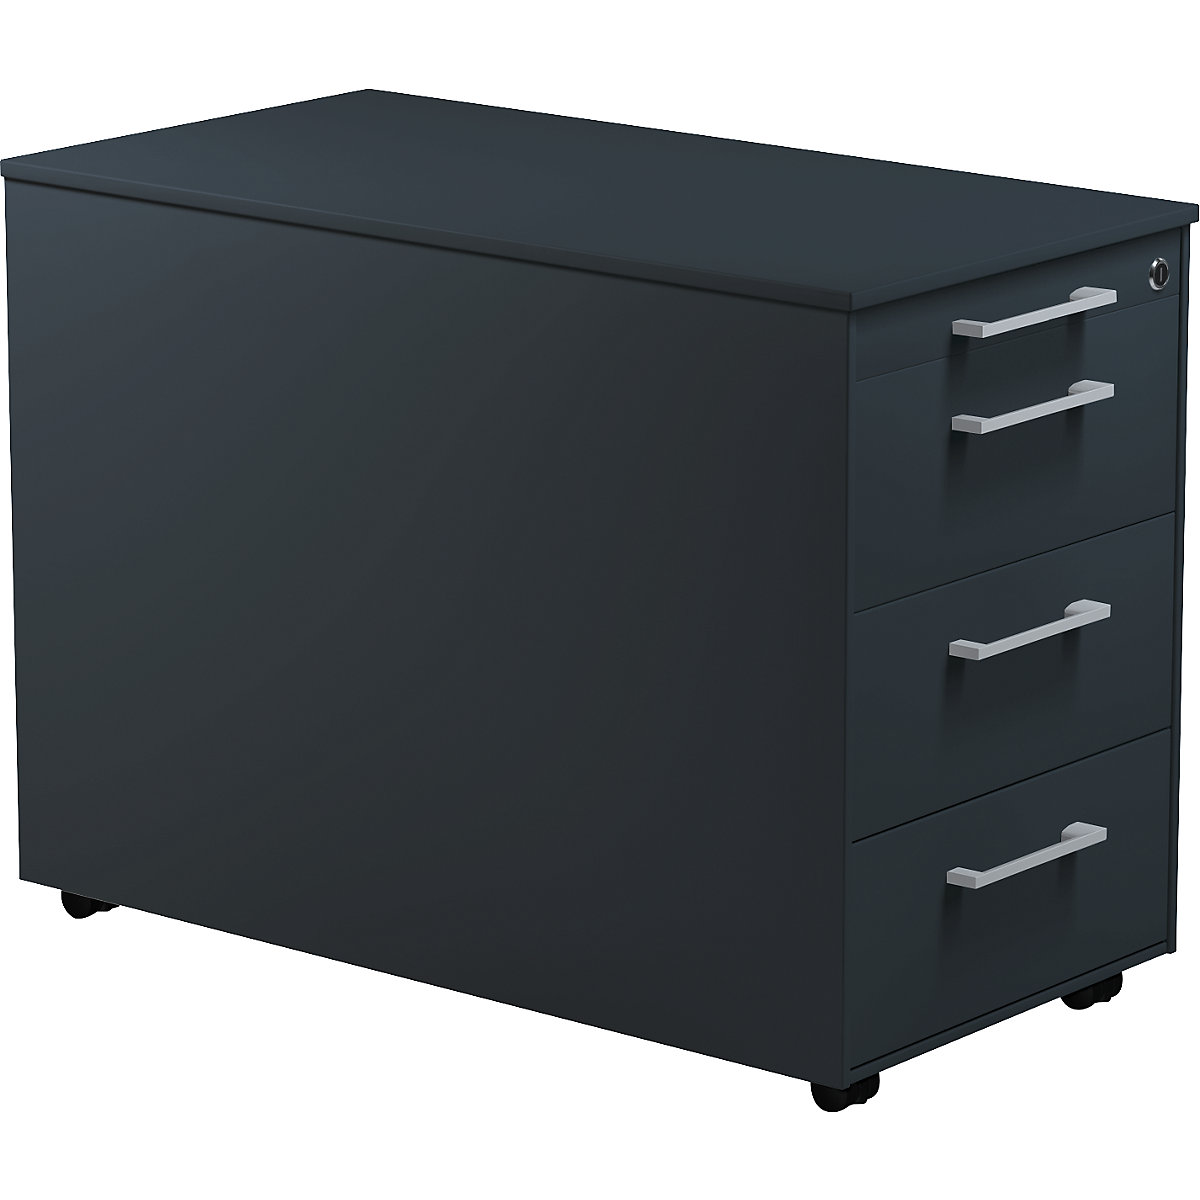 Mobile pedestal on castors – mauser, HxD 570 x 800 mm, 3 drawers, charcoal / charcoal / charcoal-4